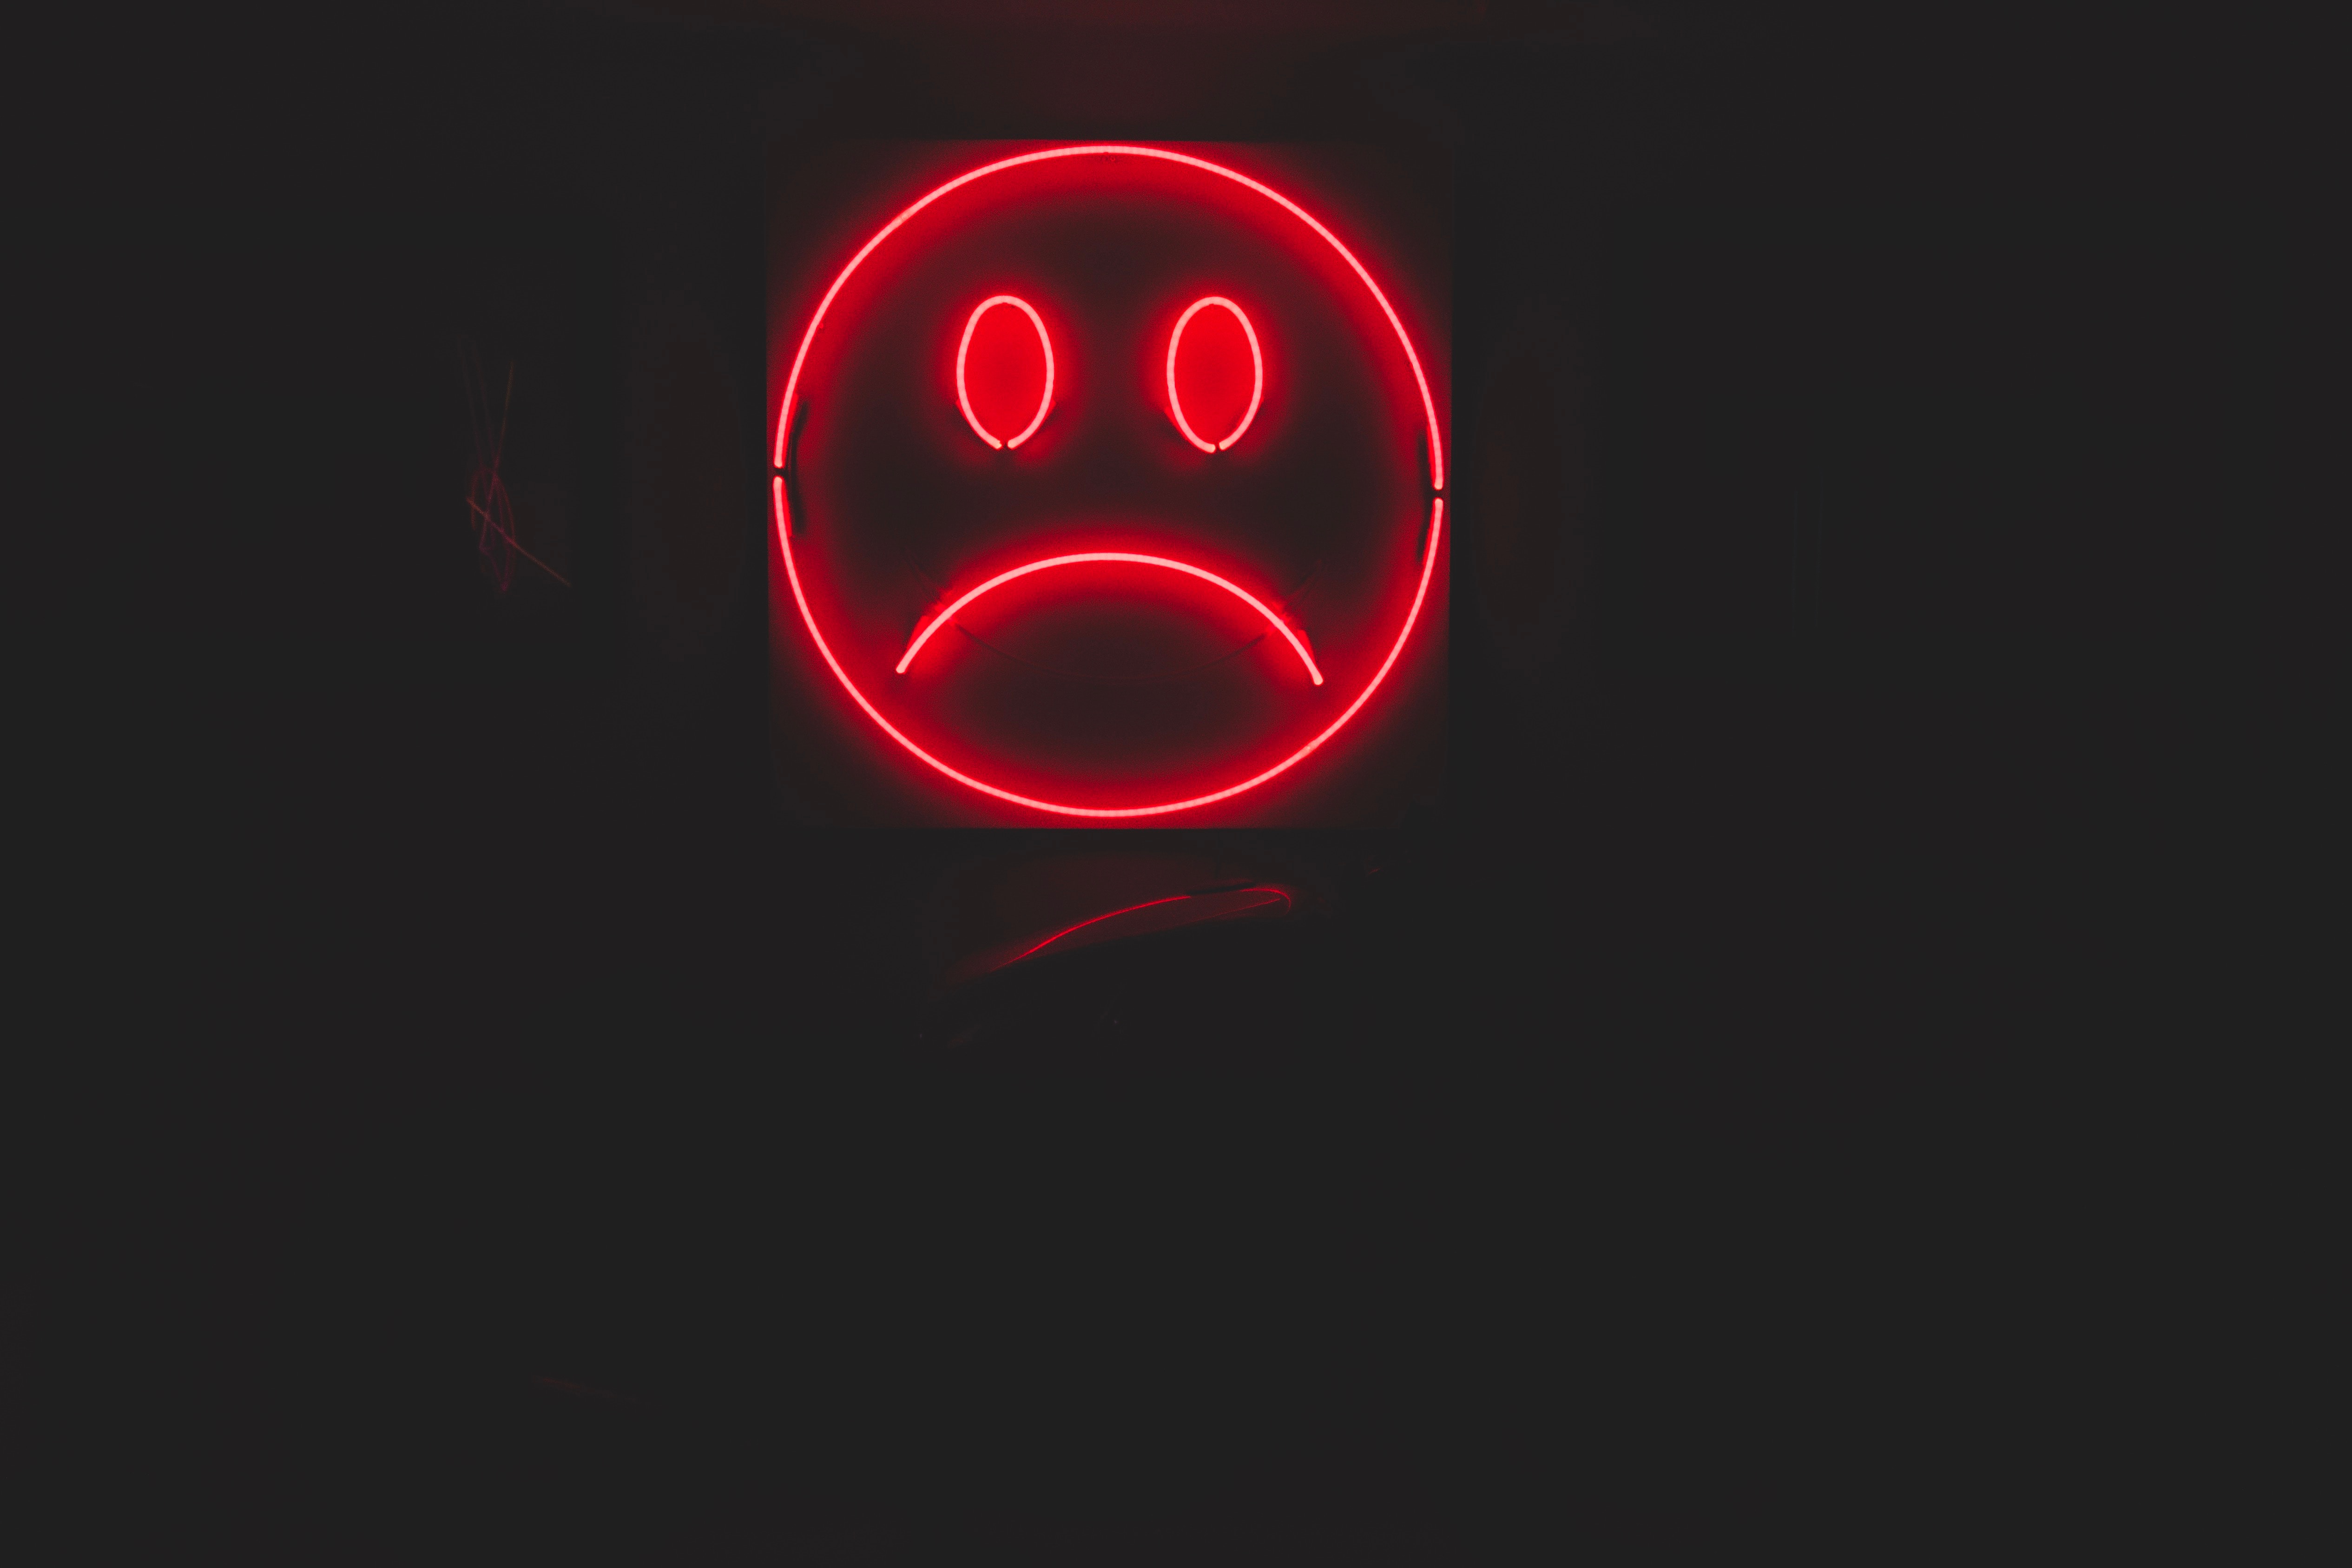 136522 download wallpaper red, dark, neon, smile, sad, emoticon, smiley screensavers and pictures for free